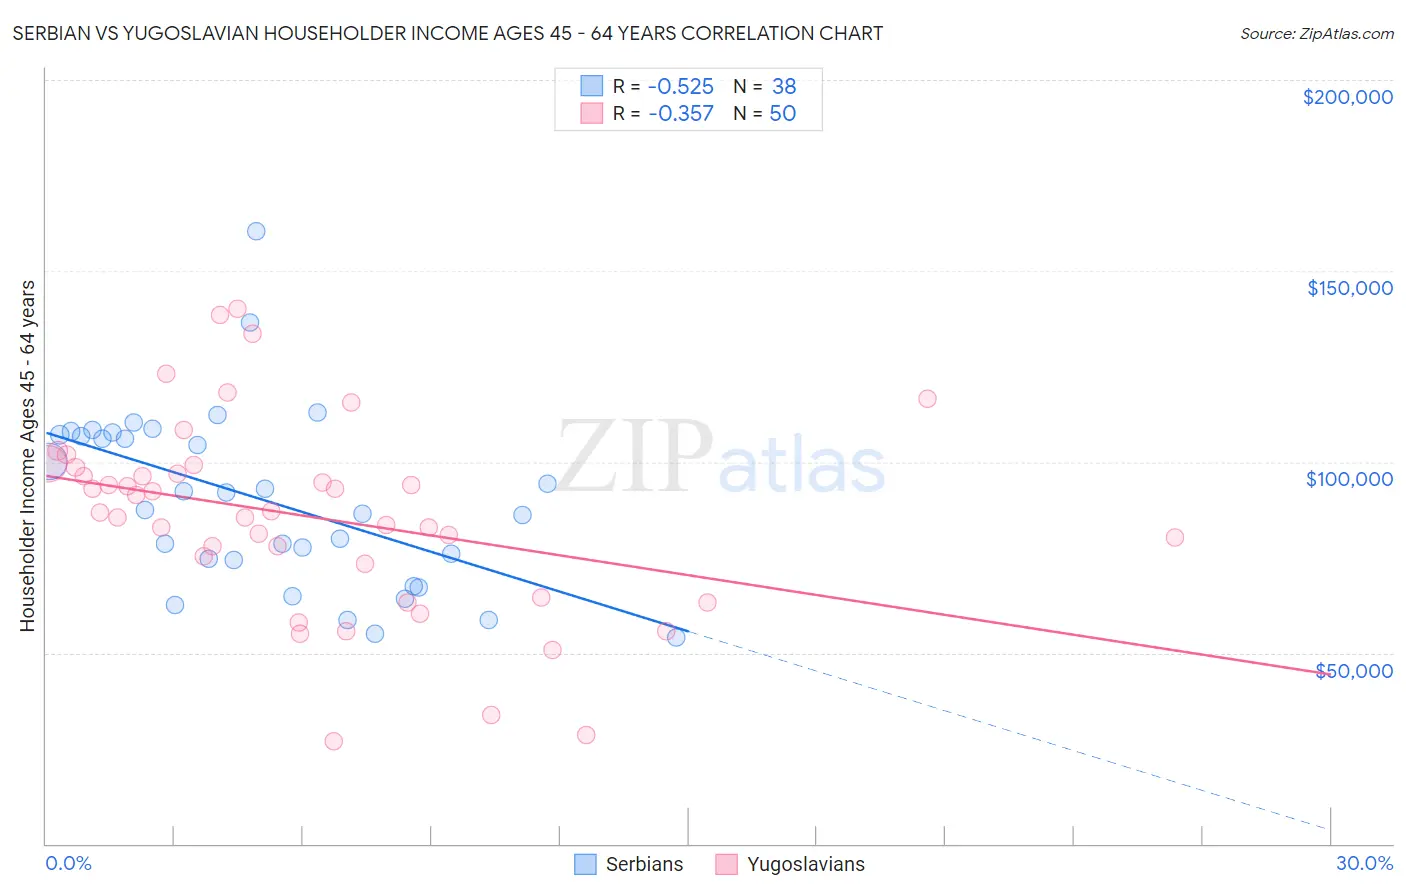 Serbian vs Yugoslavian Householder Income Ages 45 - 64 years